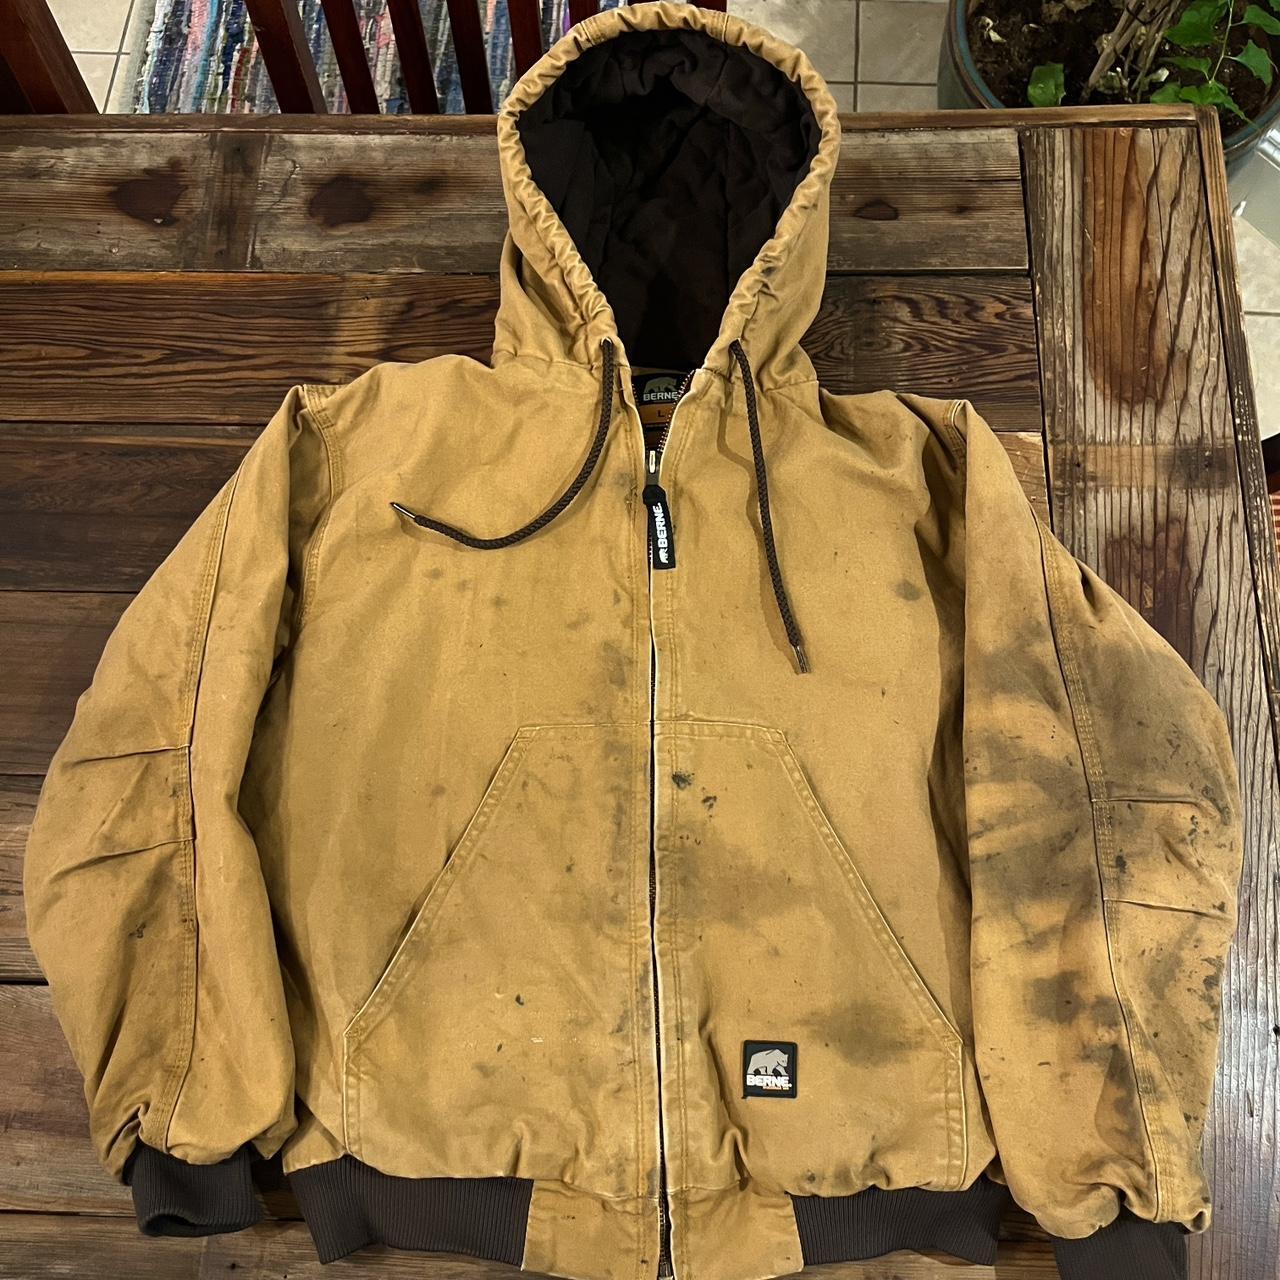 item listed by radensgrails